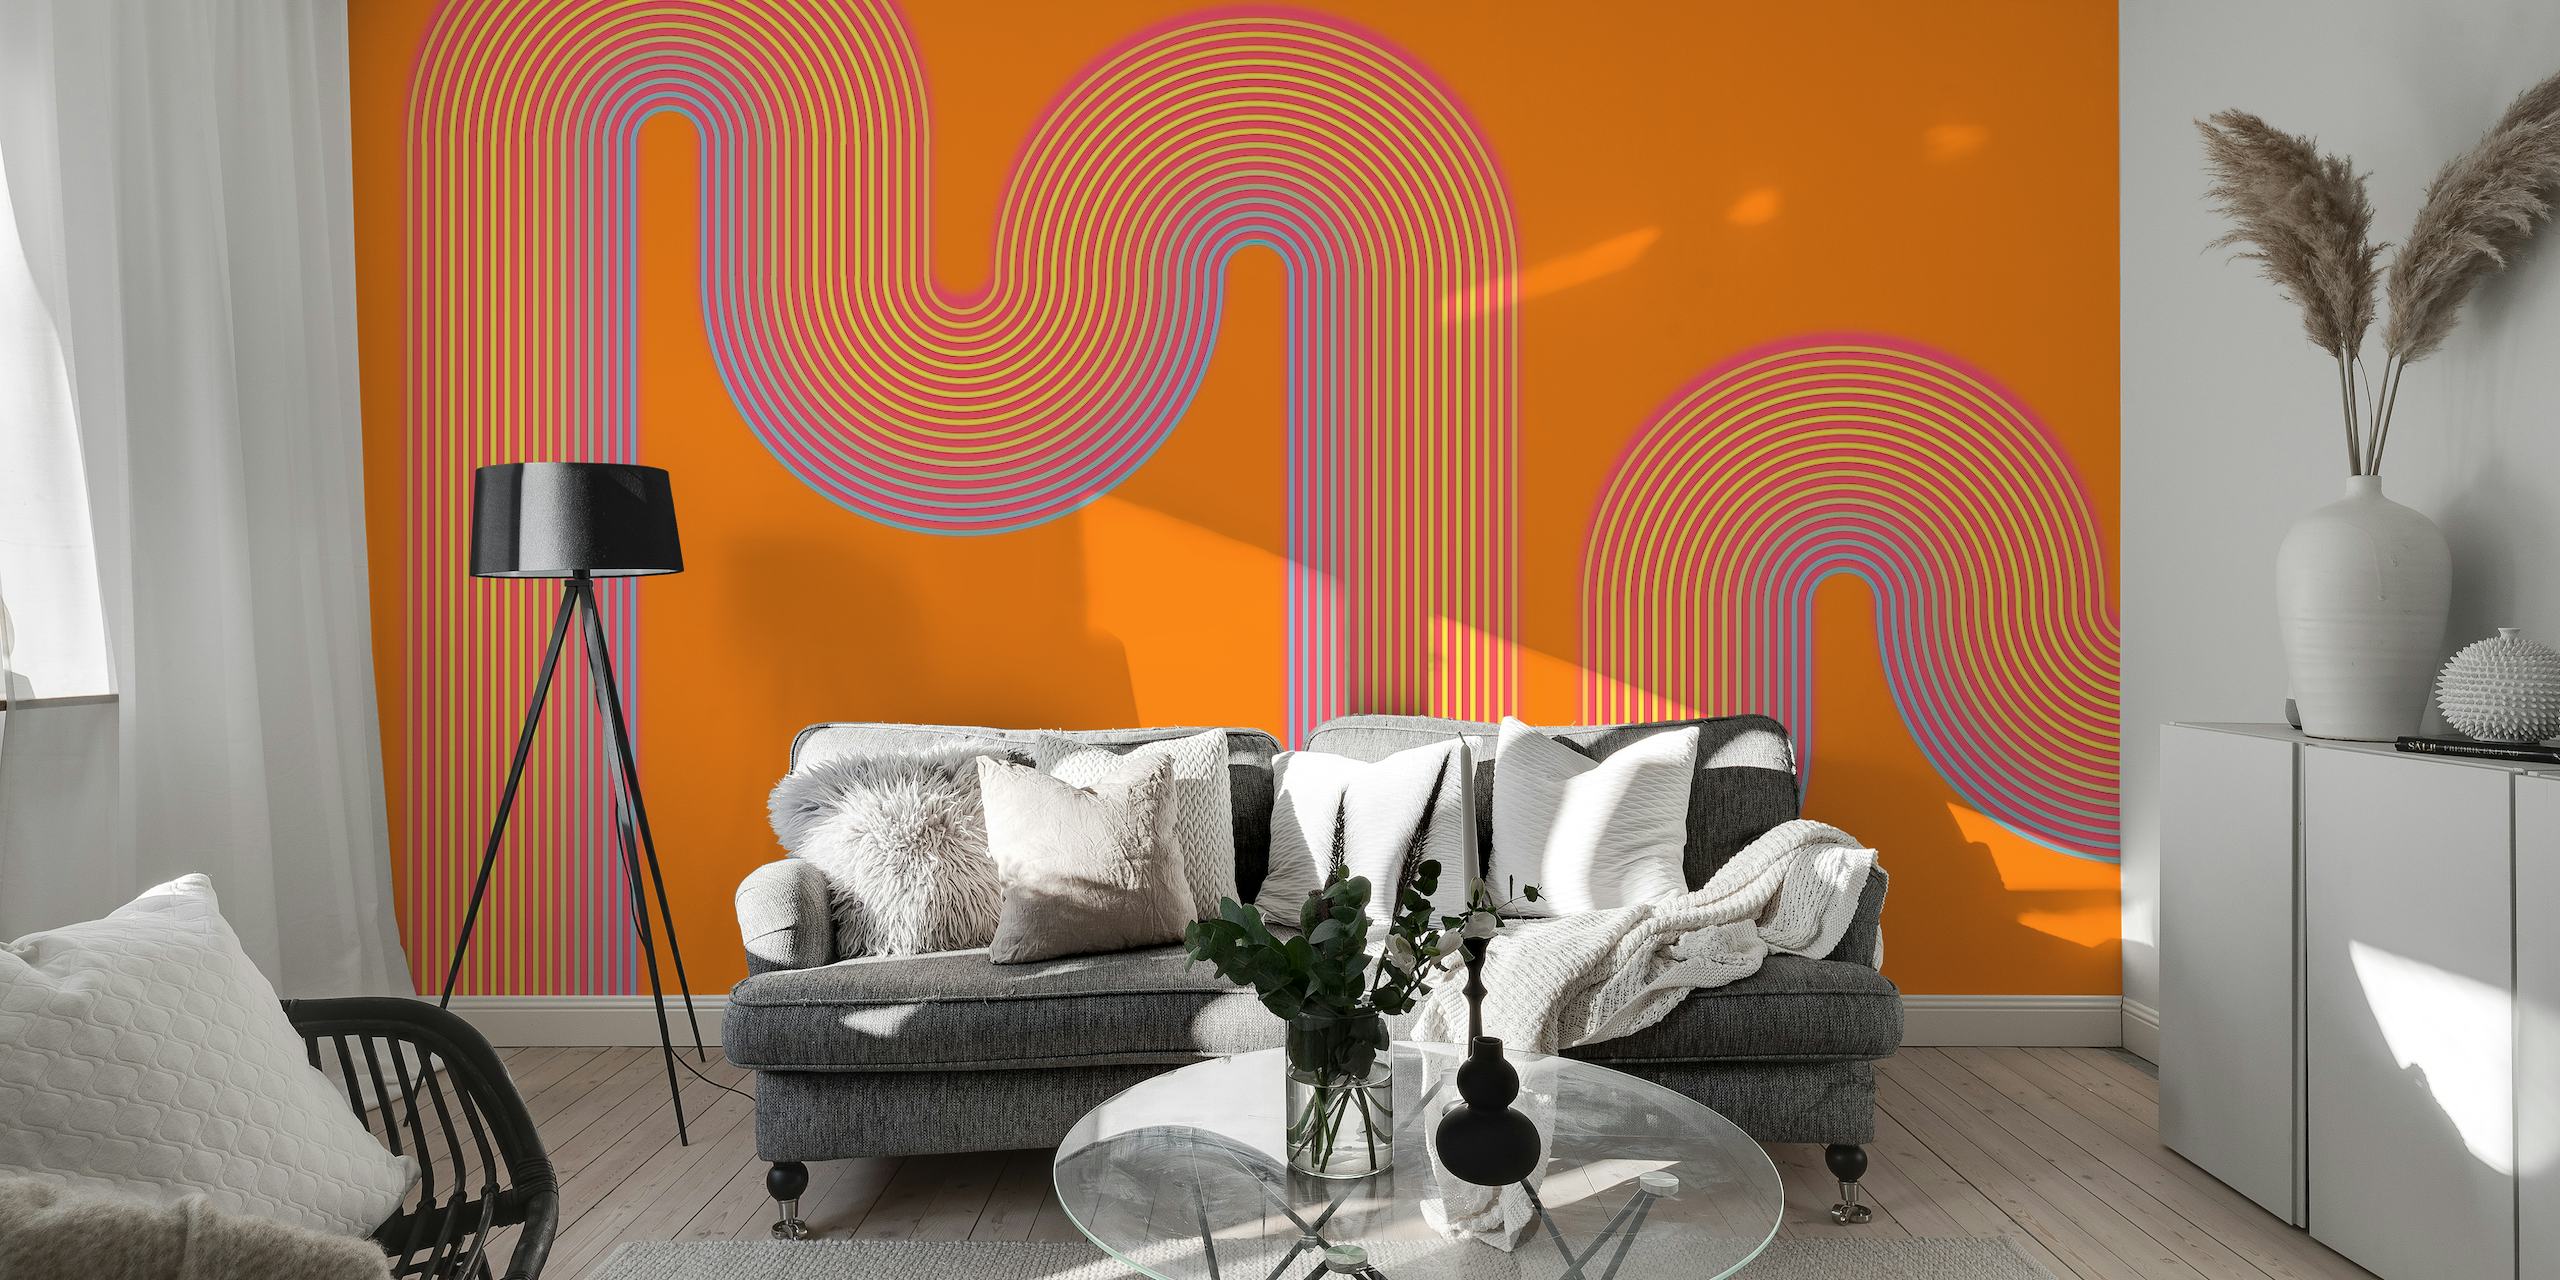 Curvy Wave abstract wall mural with flowing lines and orange backdrop